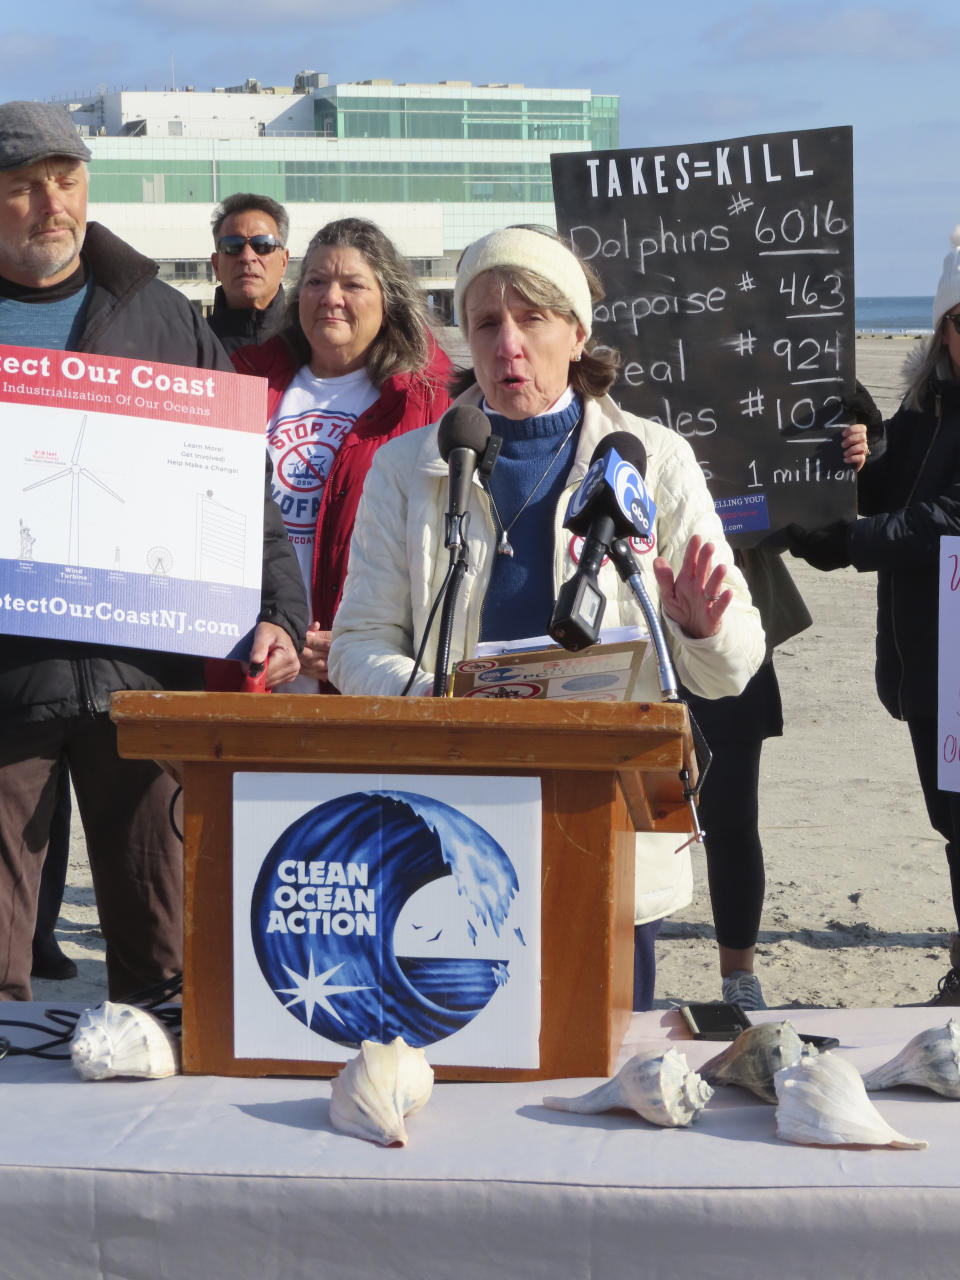 Cindy Zipf, executive director of the Clean Ocean Action environmental group, speaks at a press conference on the beach in Atlantic City, N.J., on Monday, Jan. 9, 2023, where a large dead whale was buried over the weekend. Several groups called for a federal investigation into the deaths of six whales that have washed ashore in New Jersey and New York over the past 33 days and whether the deaths were related to site preparation work for the offshore wind industry. (AP Photo/Wayne Parry)